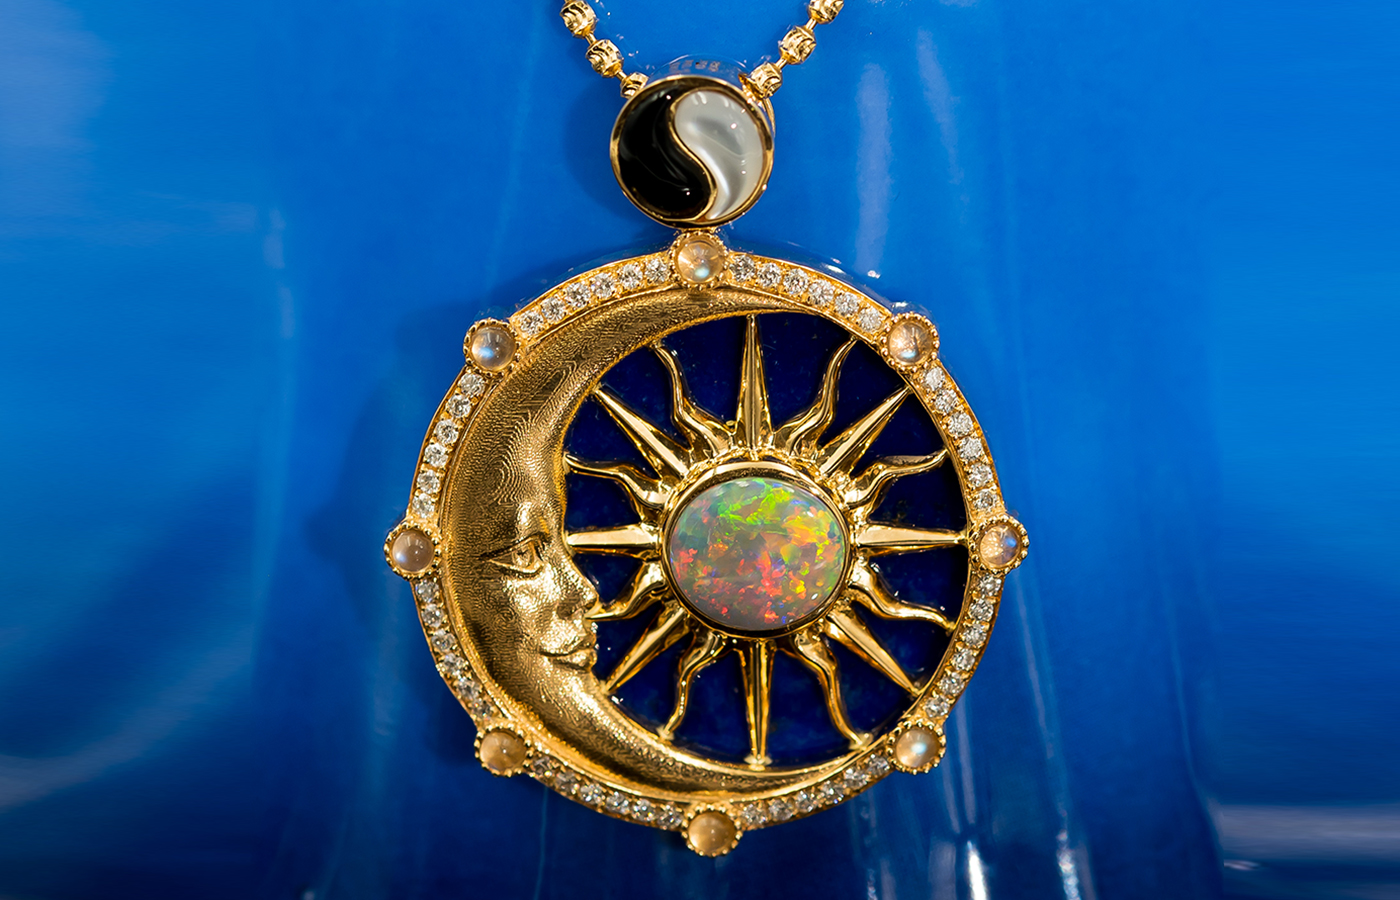 Cindy Xu Sun & Moon pendant in gold, opal, mother-of-pearl, onyx and diamond